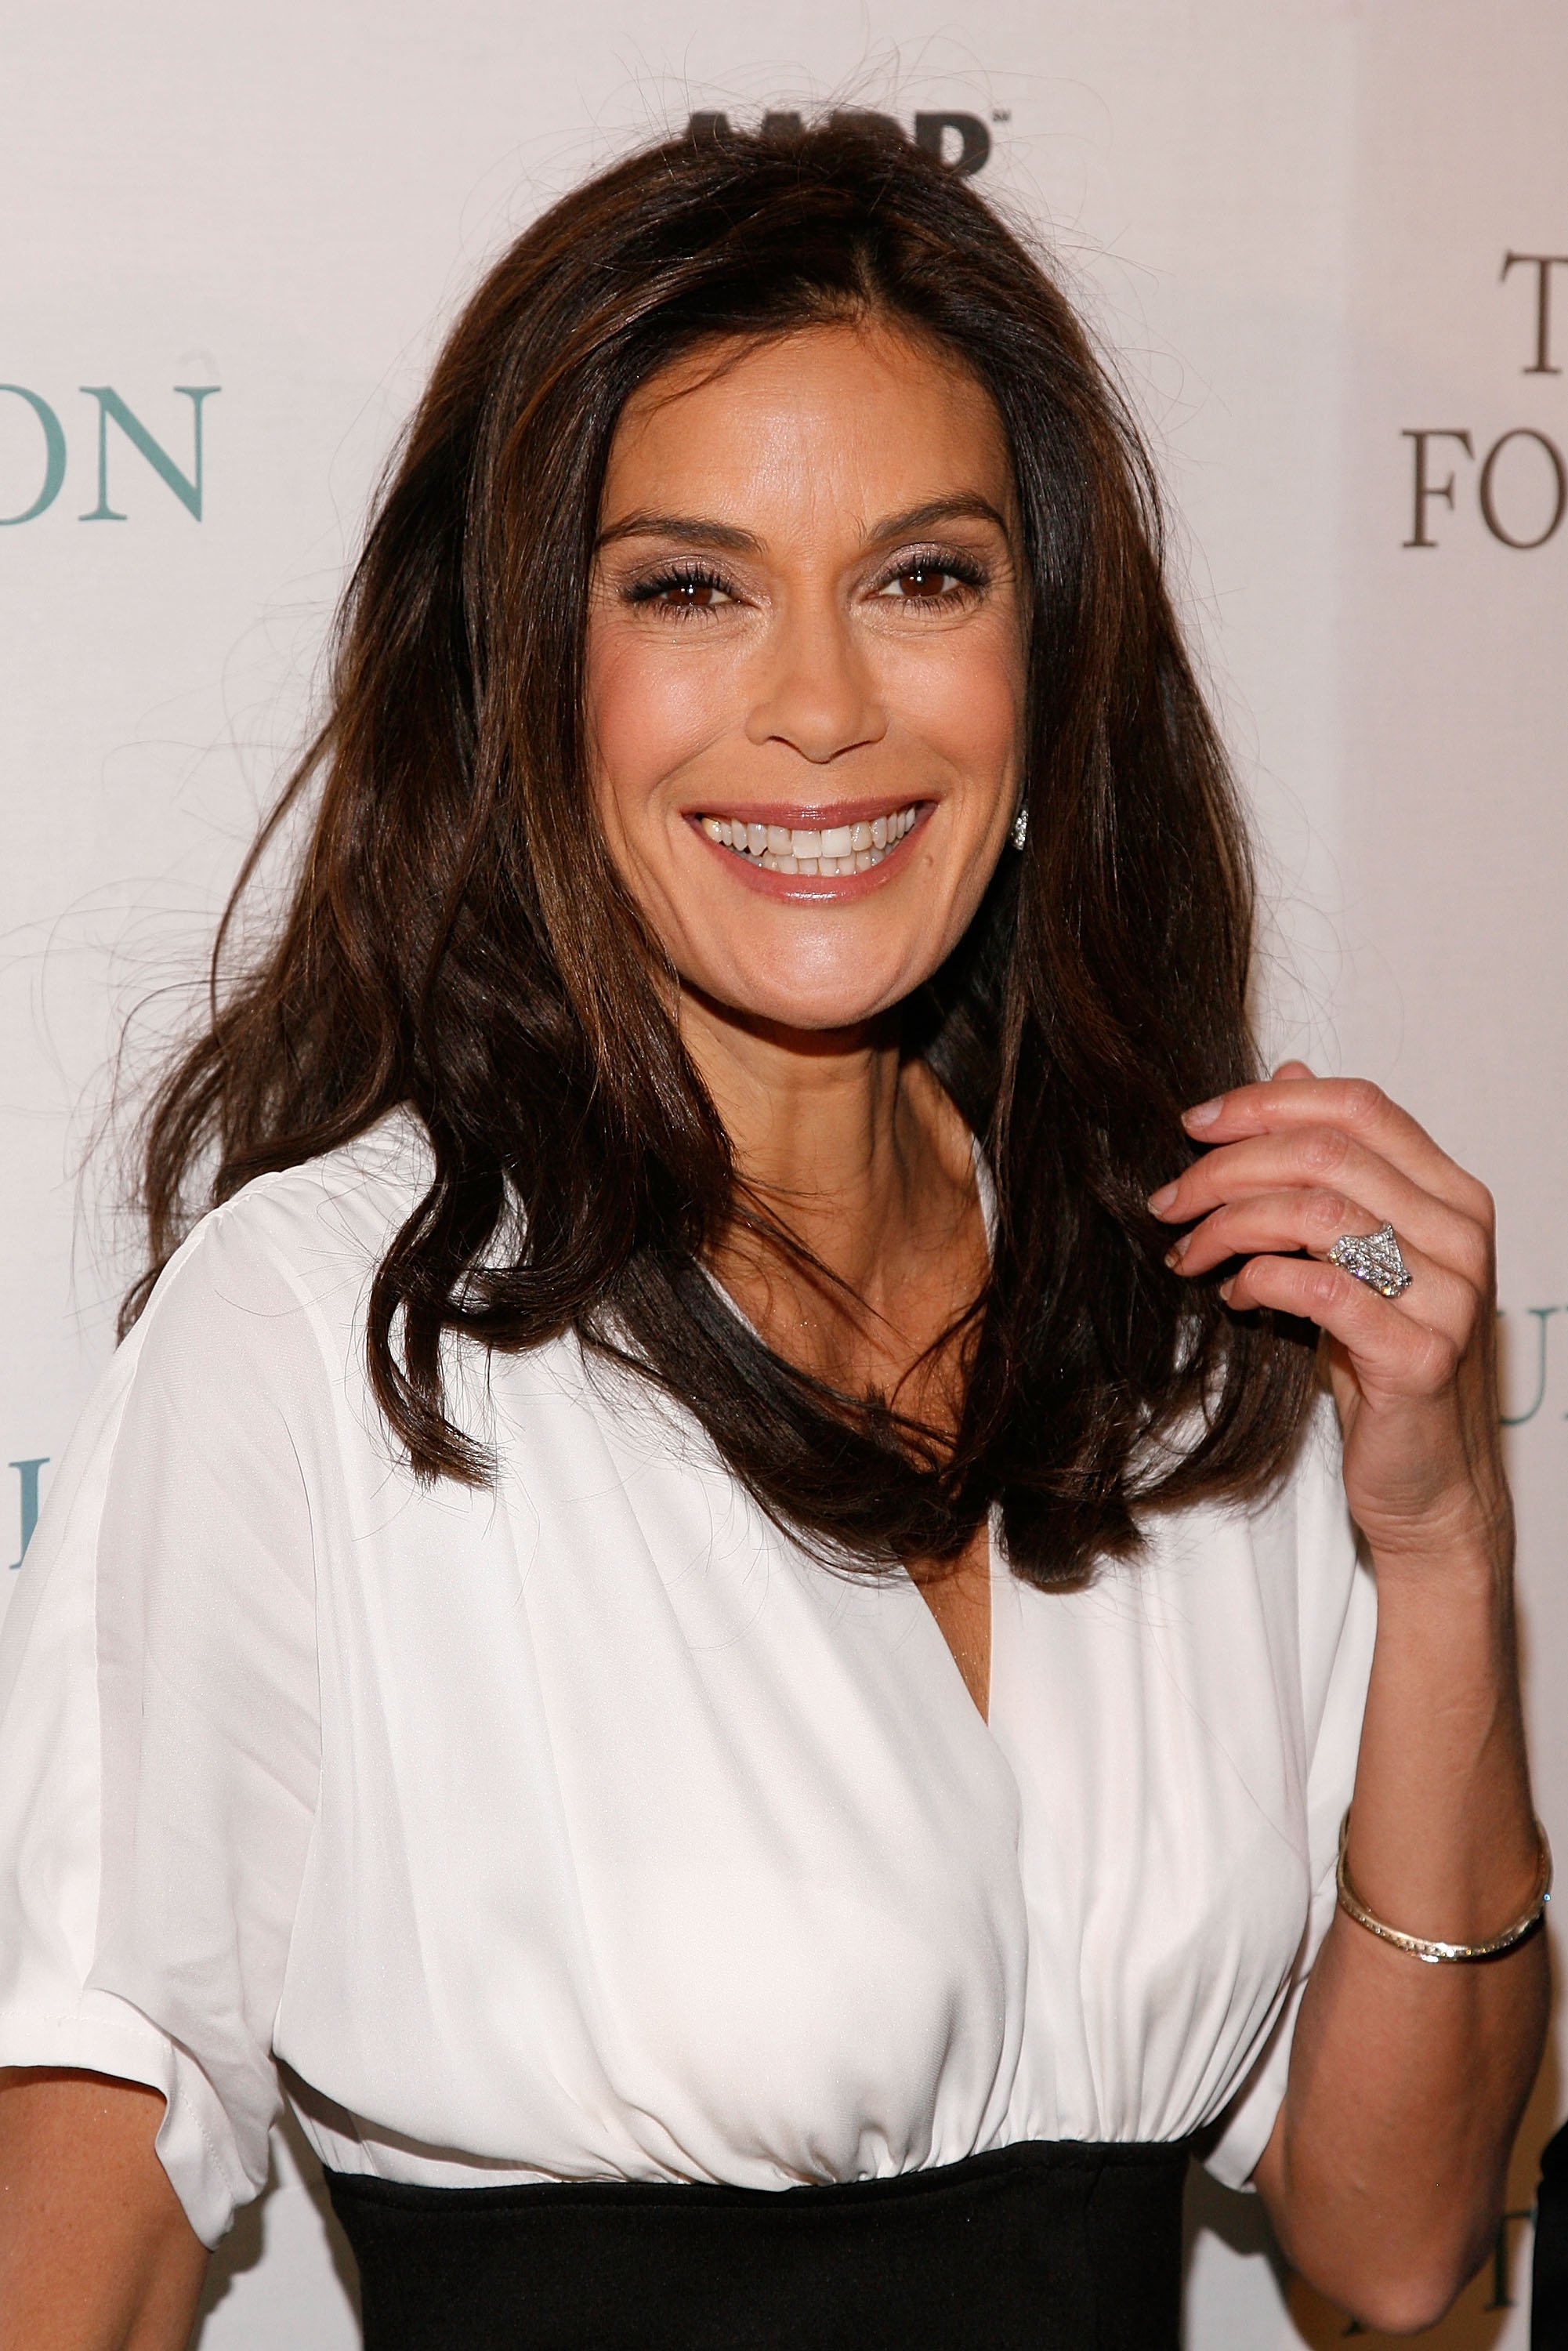 http://cccsupermanfans.files.wordpress.com/2009/01/52412_celebutopia-teri_hatcher-green_inaugural_ball-artists_and_athletes_alliance_red_carpet_event-03_122_973lo.jpg